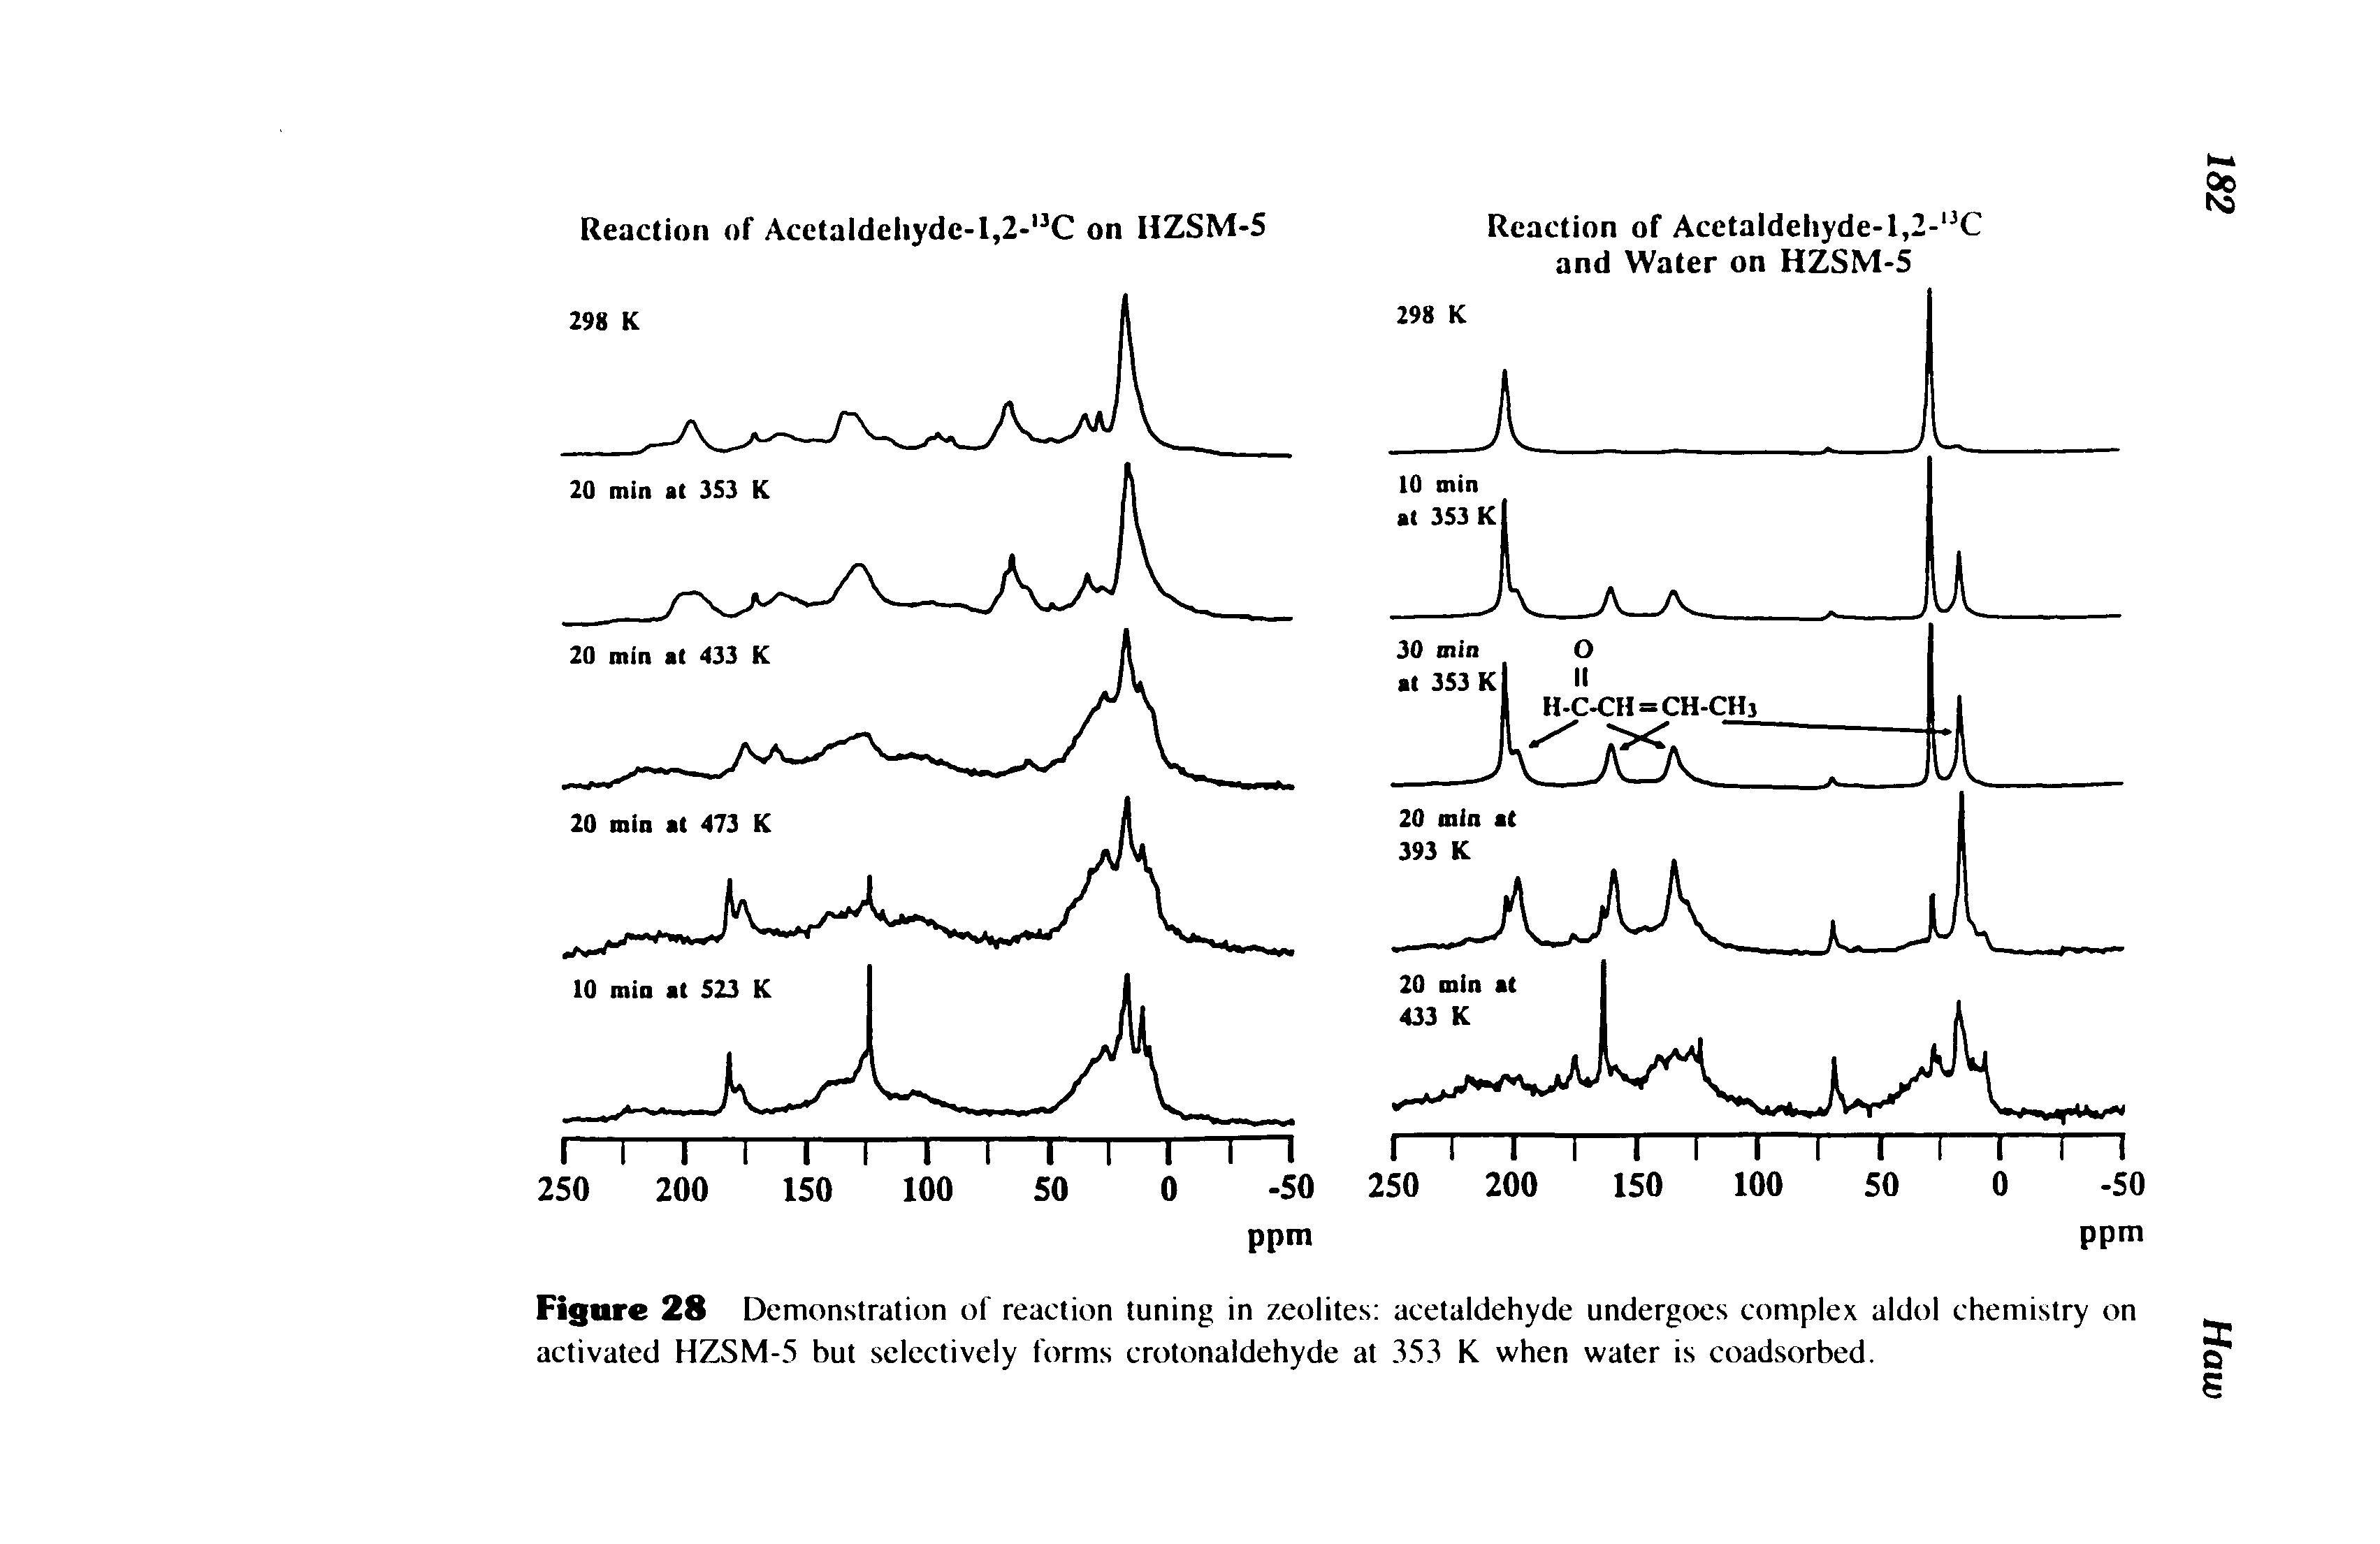 Figure 28 Demonstration of reaction tuning in zeolites acetaldehyde undergoes complex aldol chemistry on activated HZSM-5 but selectively forms crotonaldehyde at 353 K when water is coadsorbed.